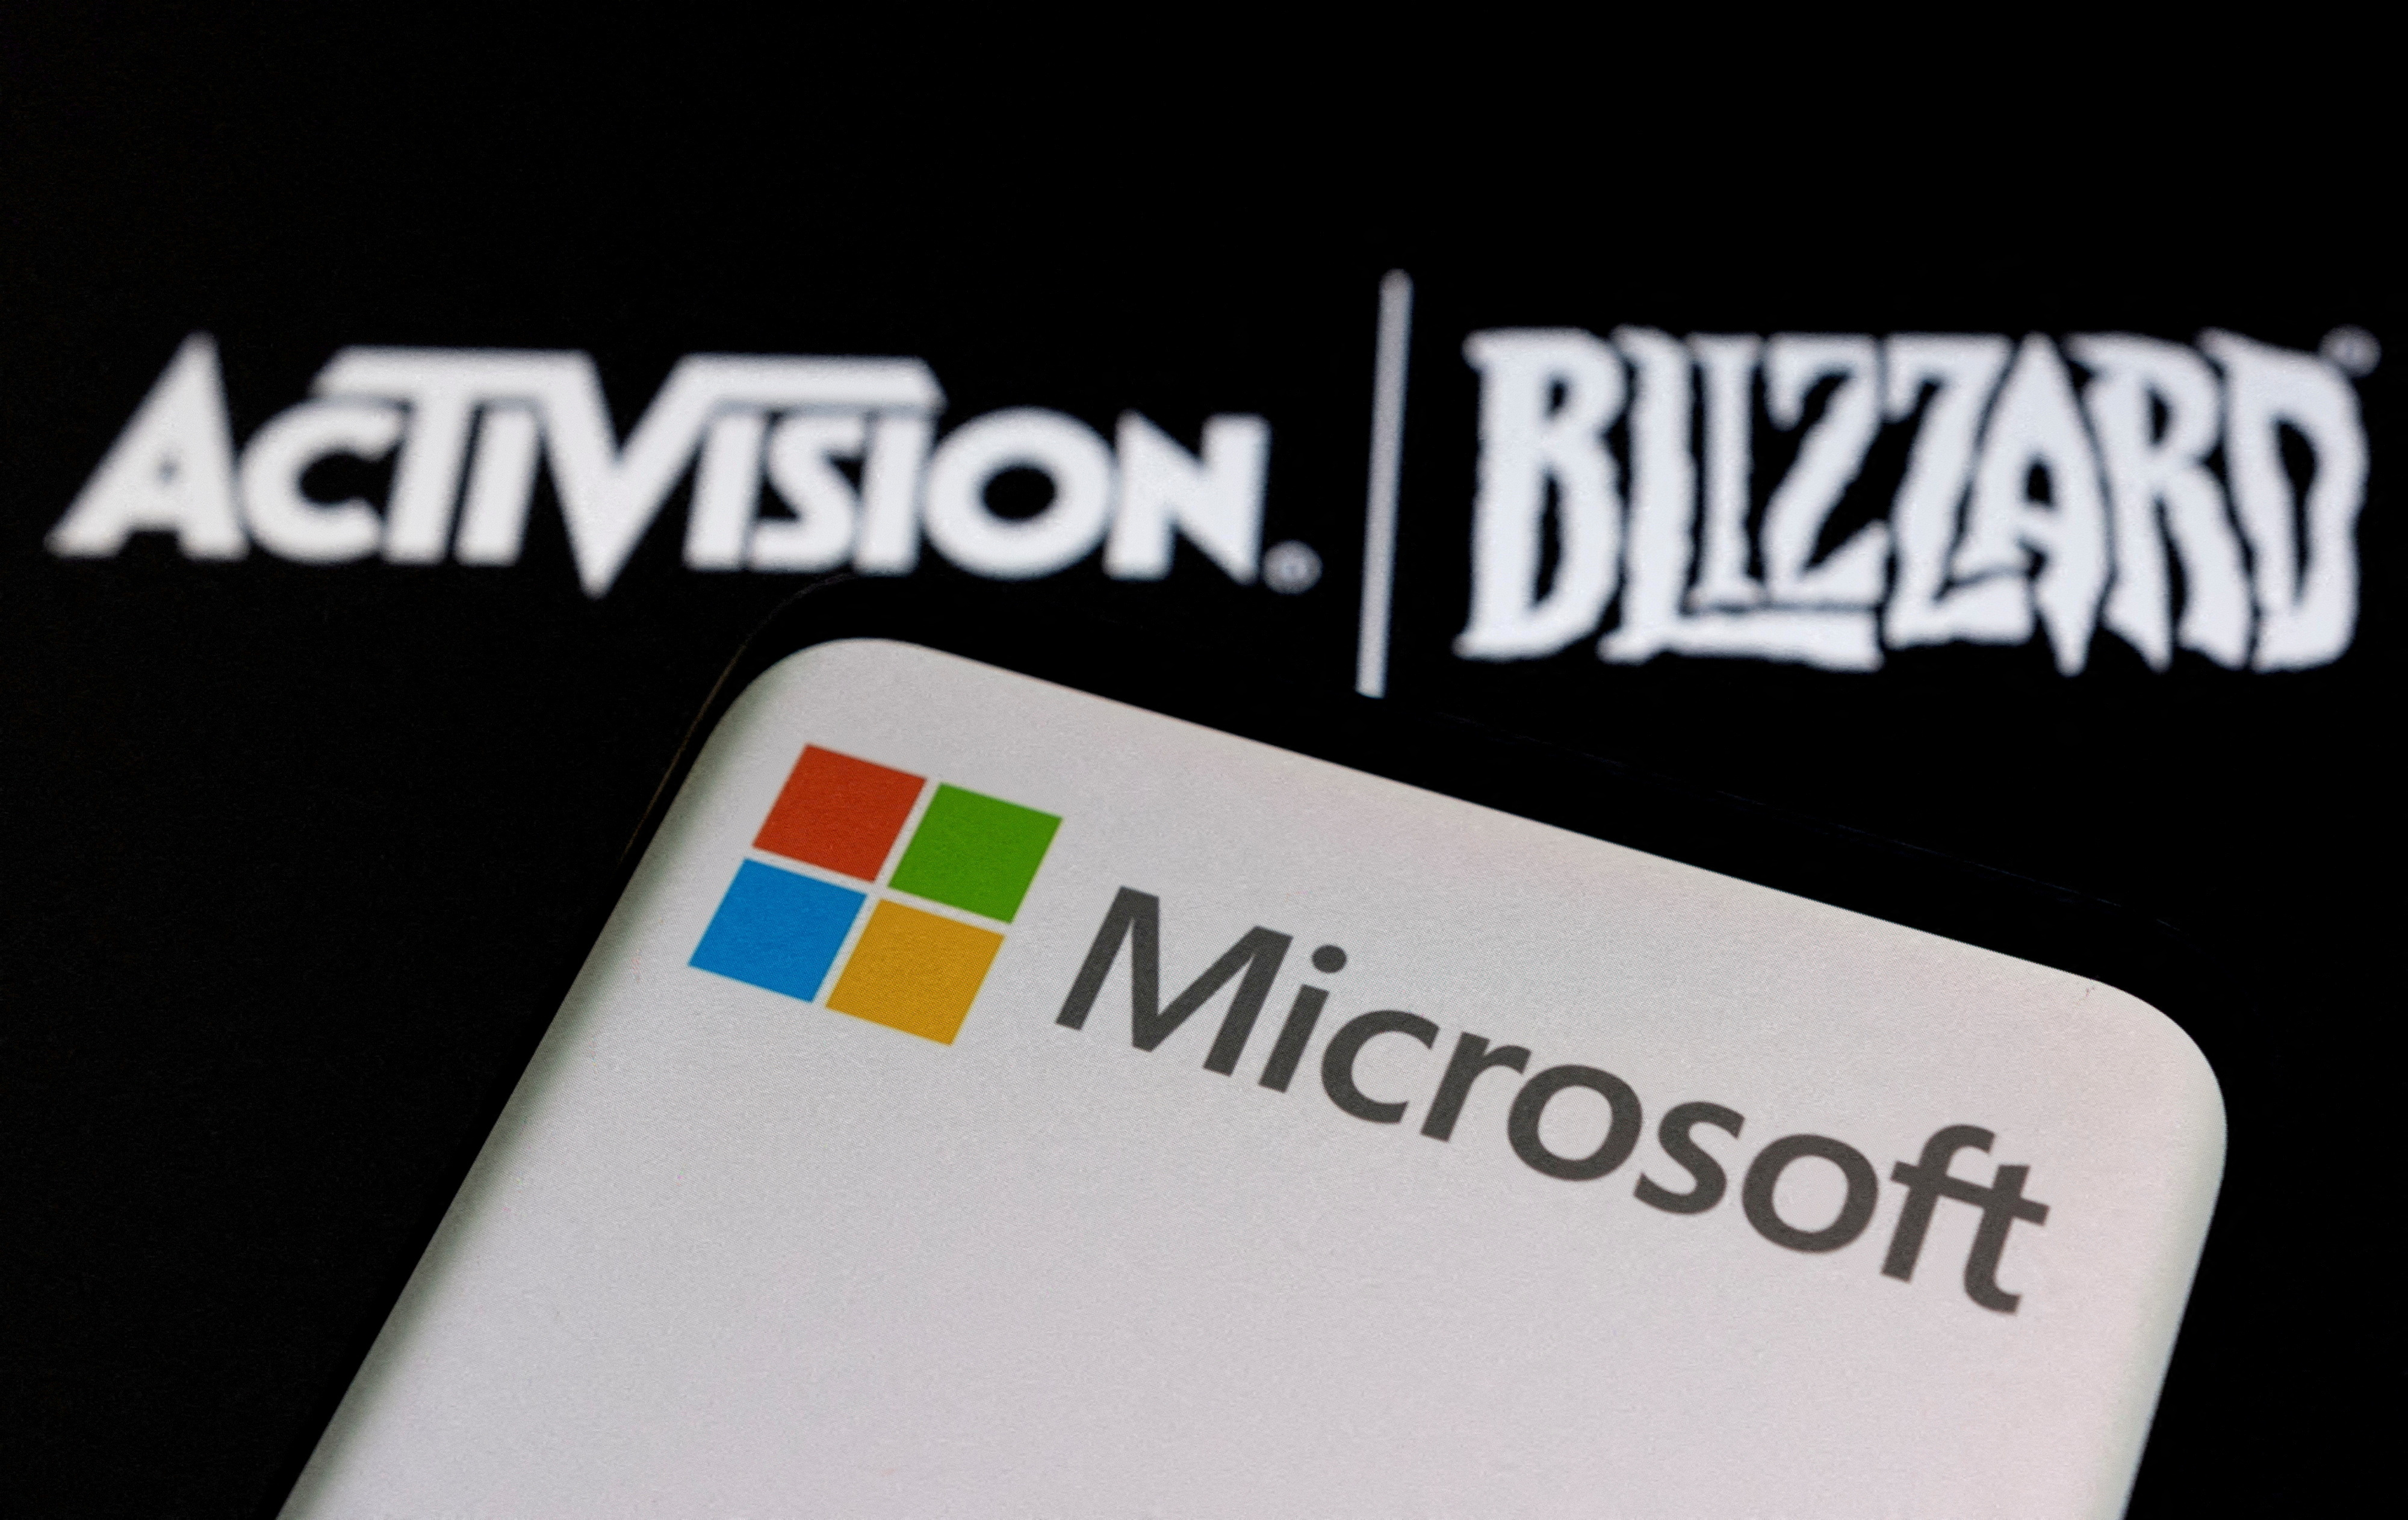 Microsoft Submits New Activision Blizzard Deal for Review After CMA  Confirms Original Deal Block - IGN